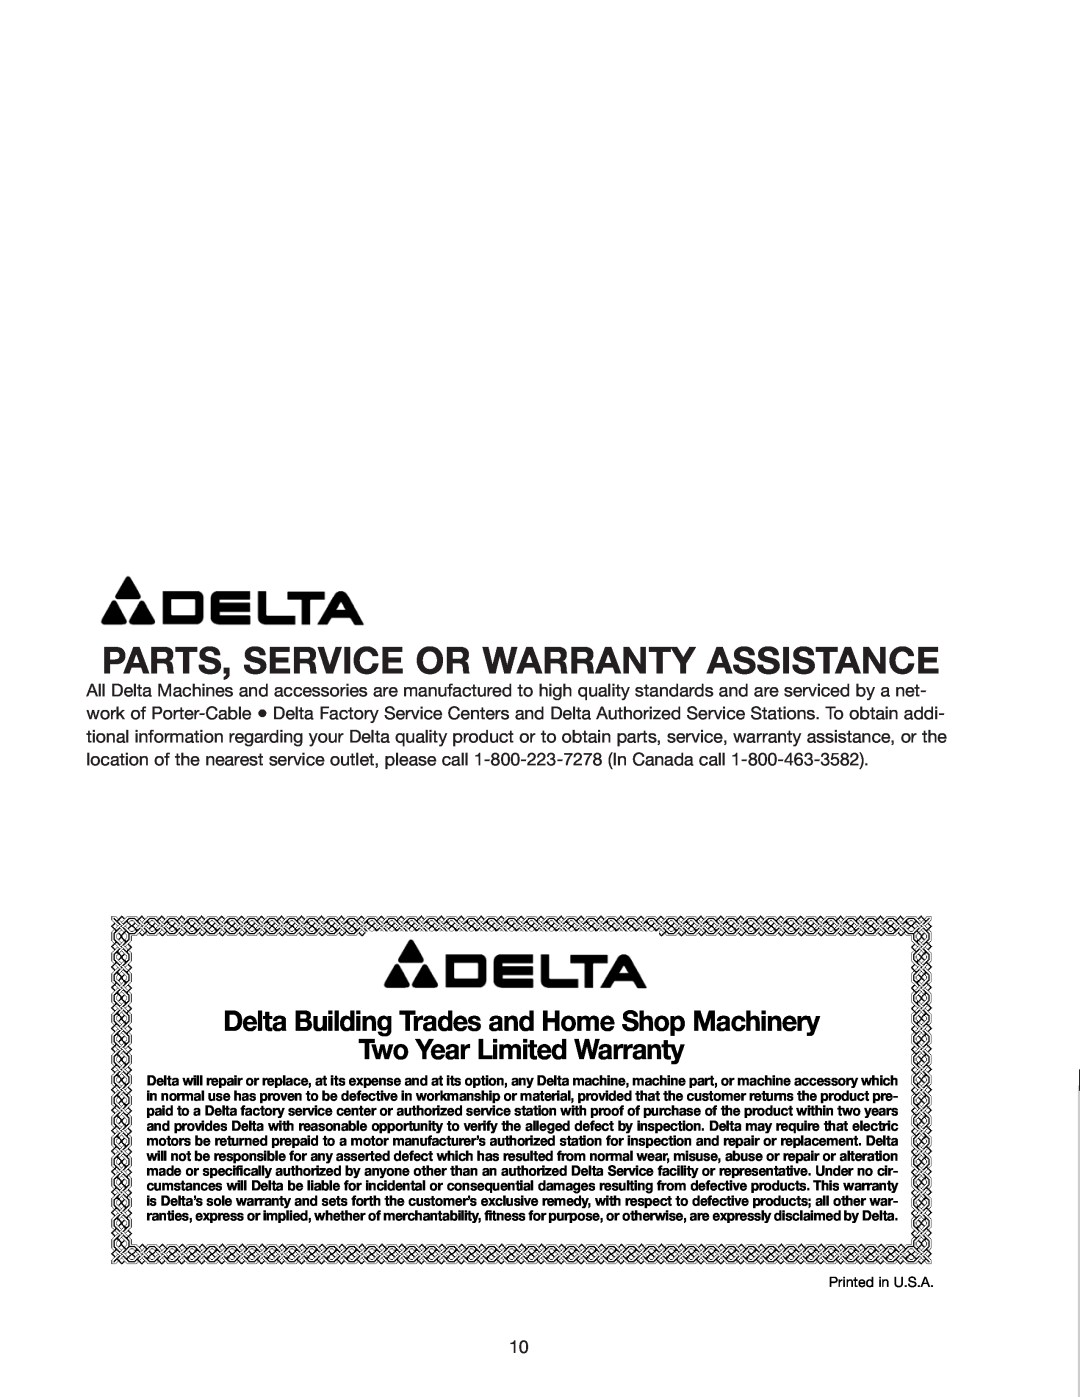 Deltaco 50-868 instruction manual Parts, Service Or Warranty Assistance, Delta Building Trades and Home Shop Machinery 